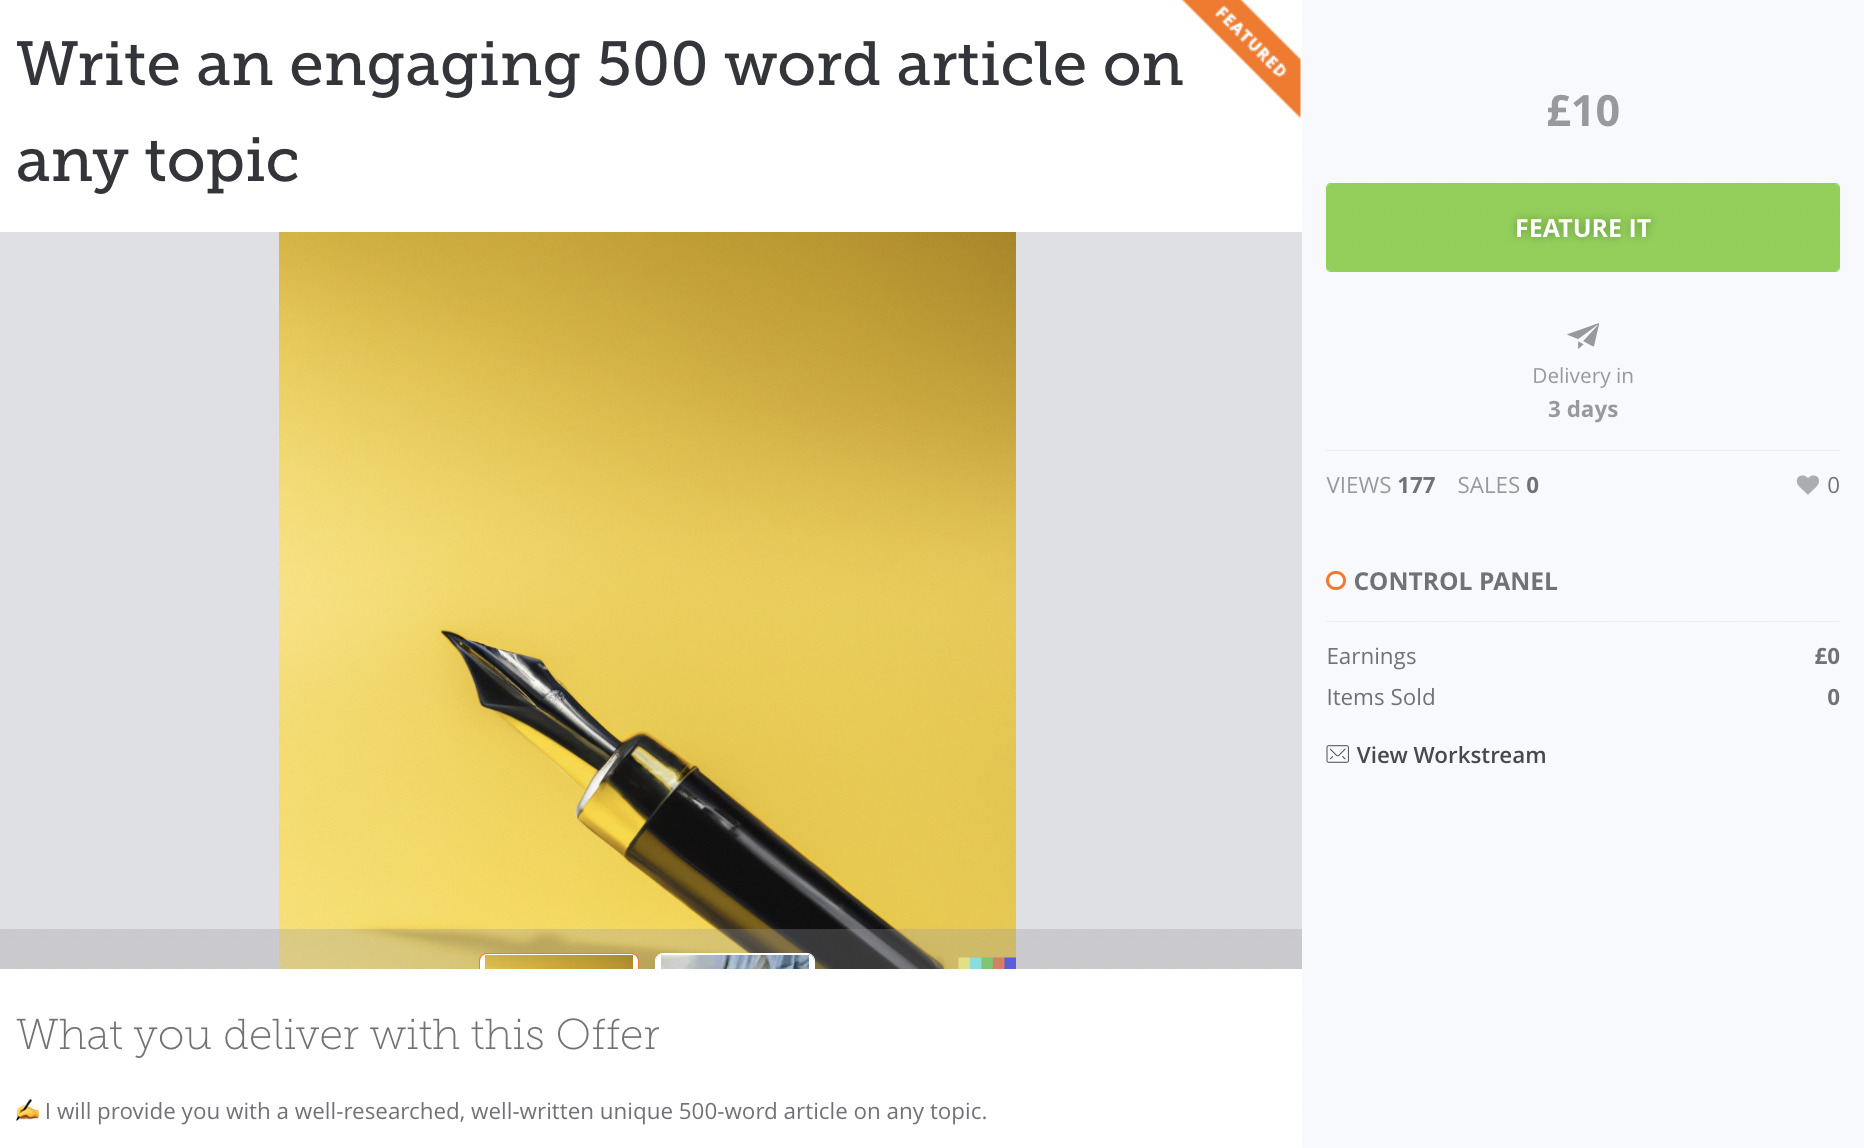 Content writing service, via People Per Hour 